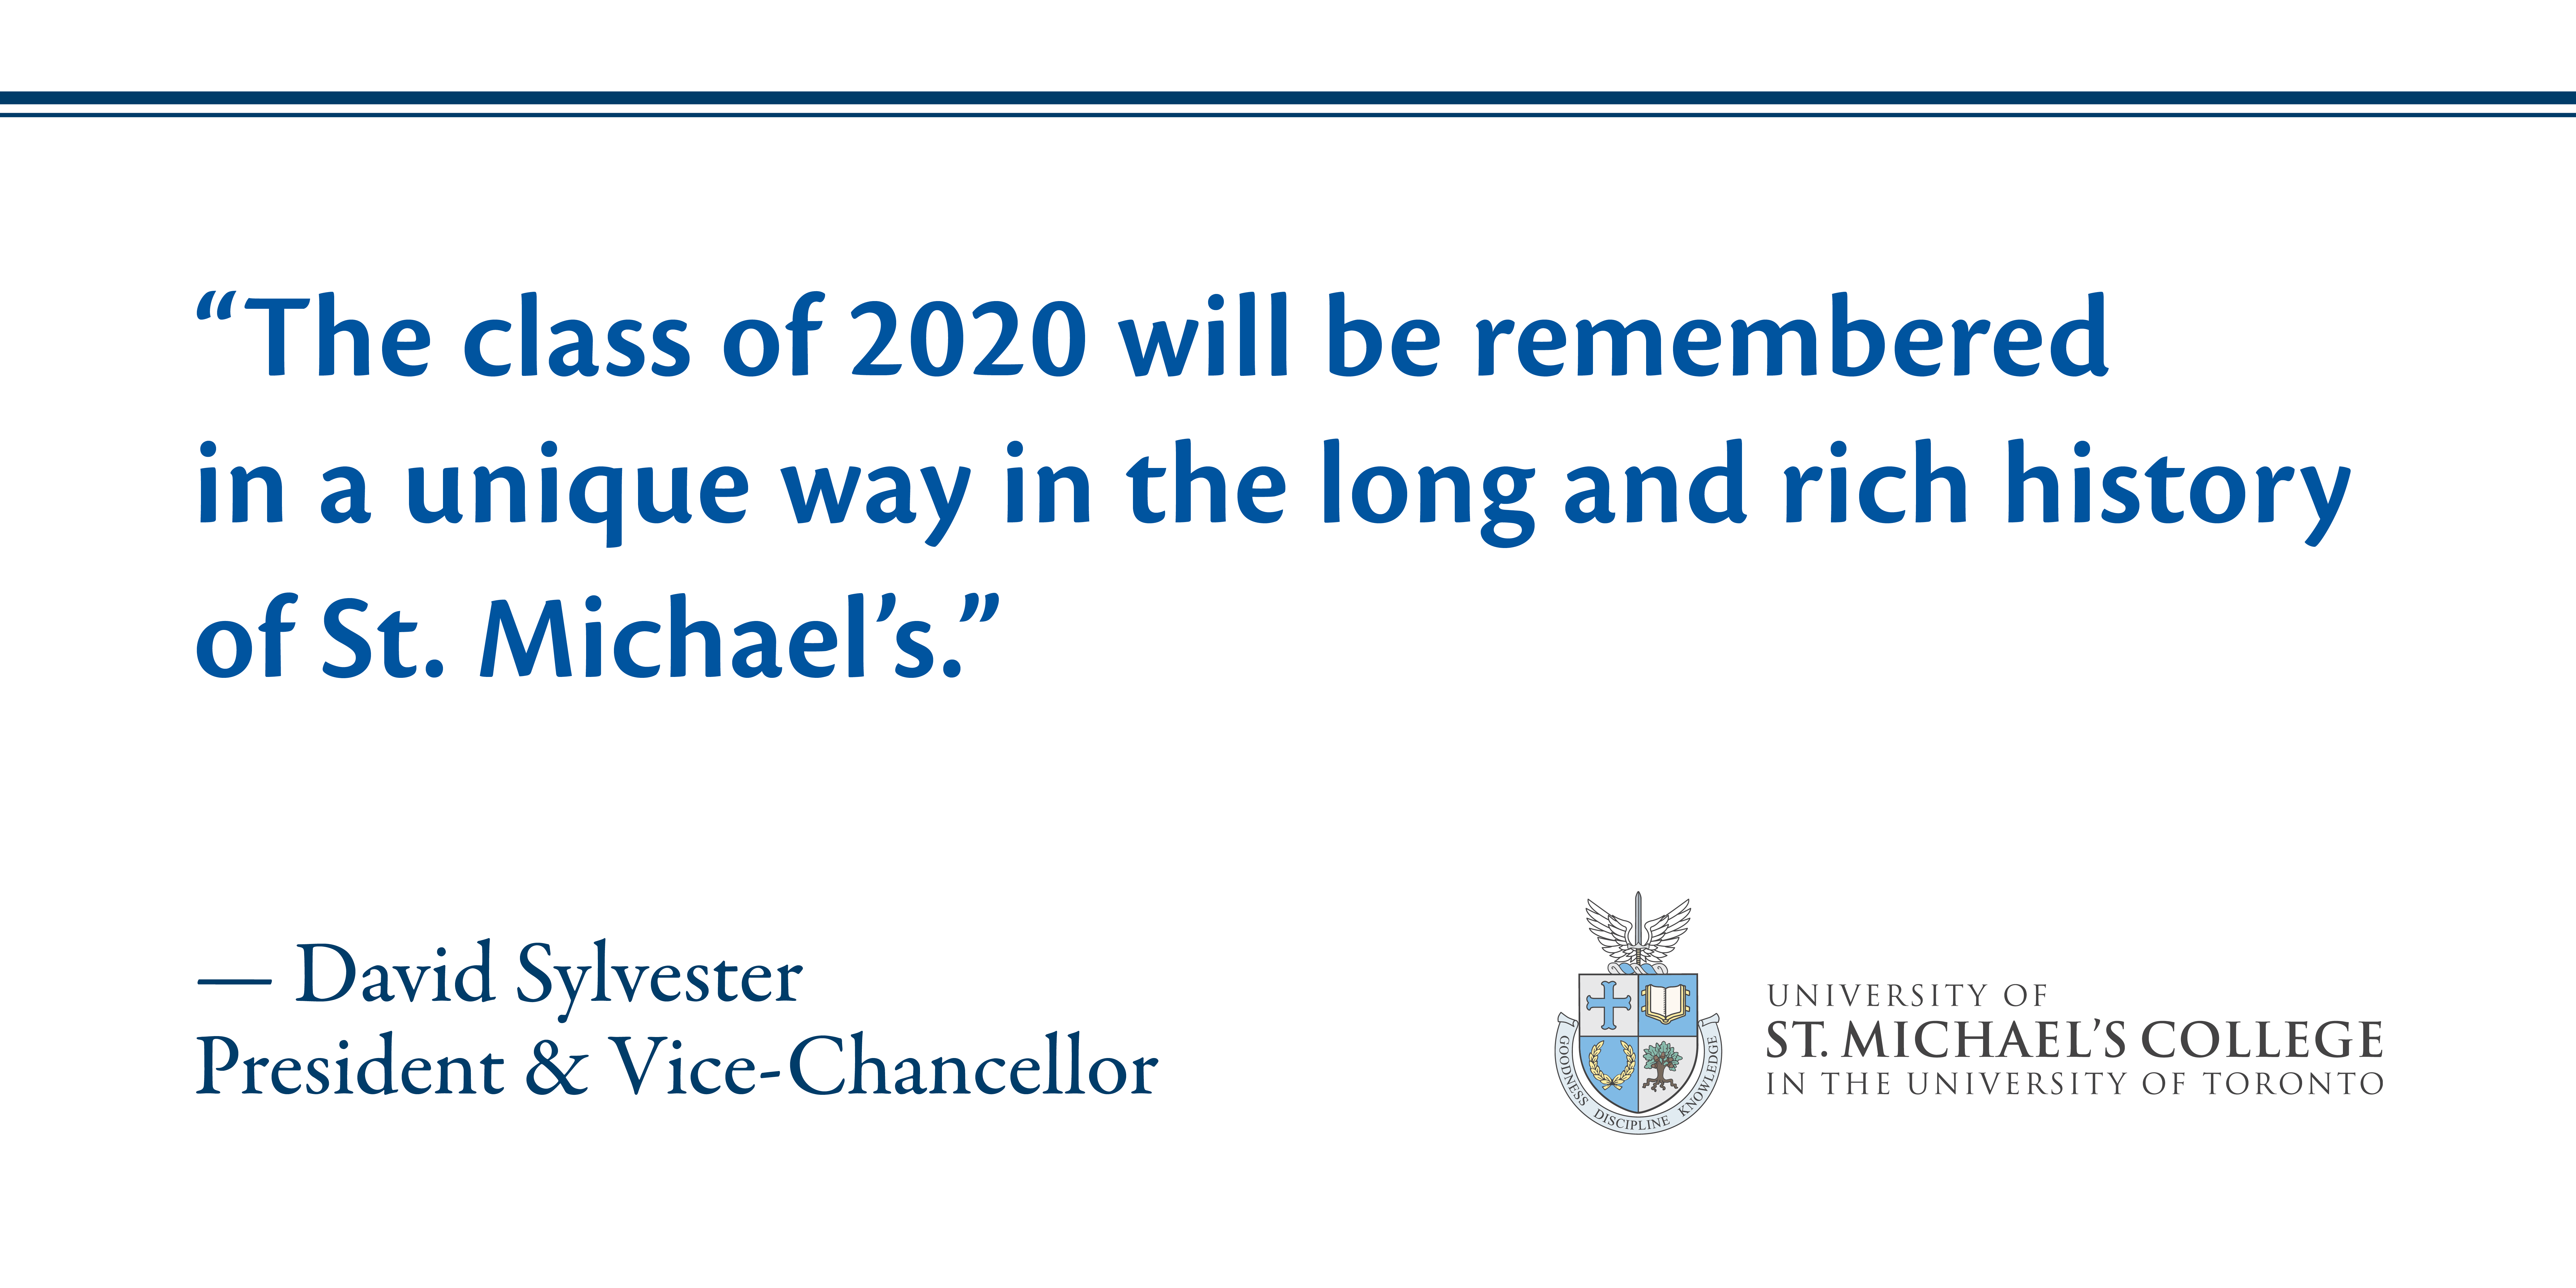 Image contains a quotation from St. Michael's President David Sylvester says "The class of 2020 will be remembered in a unique way in the long and rich history of St. Michael's." "